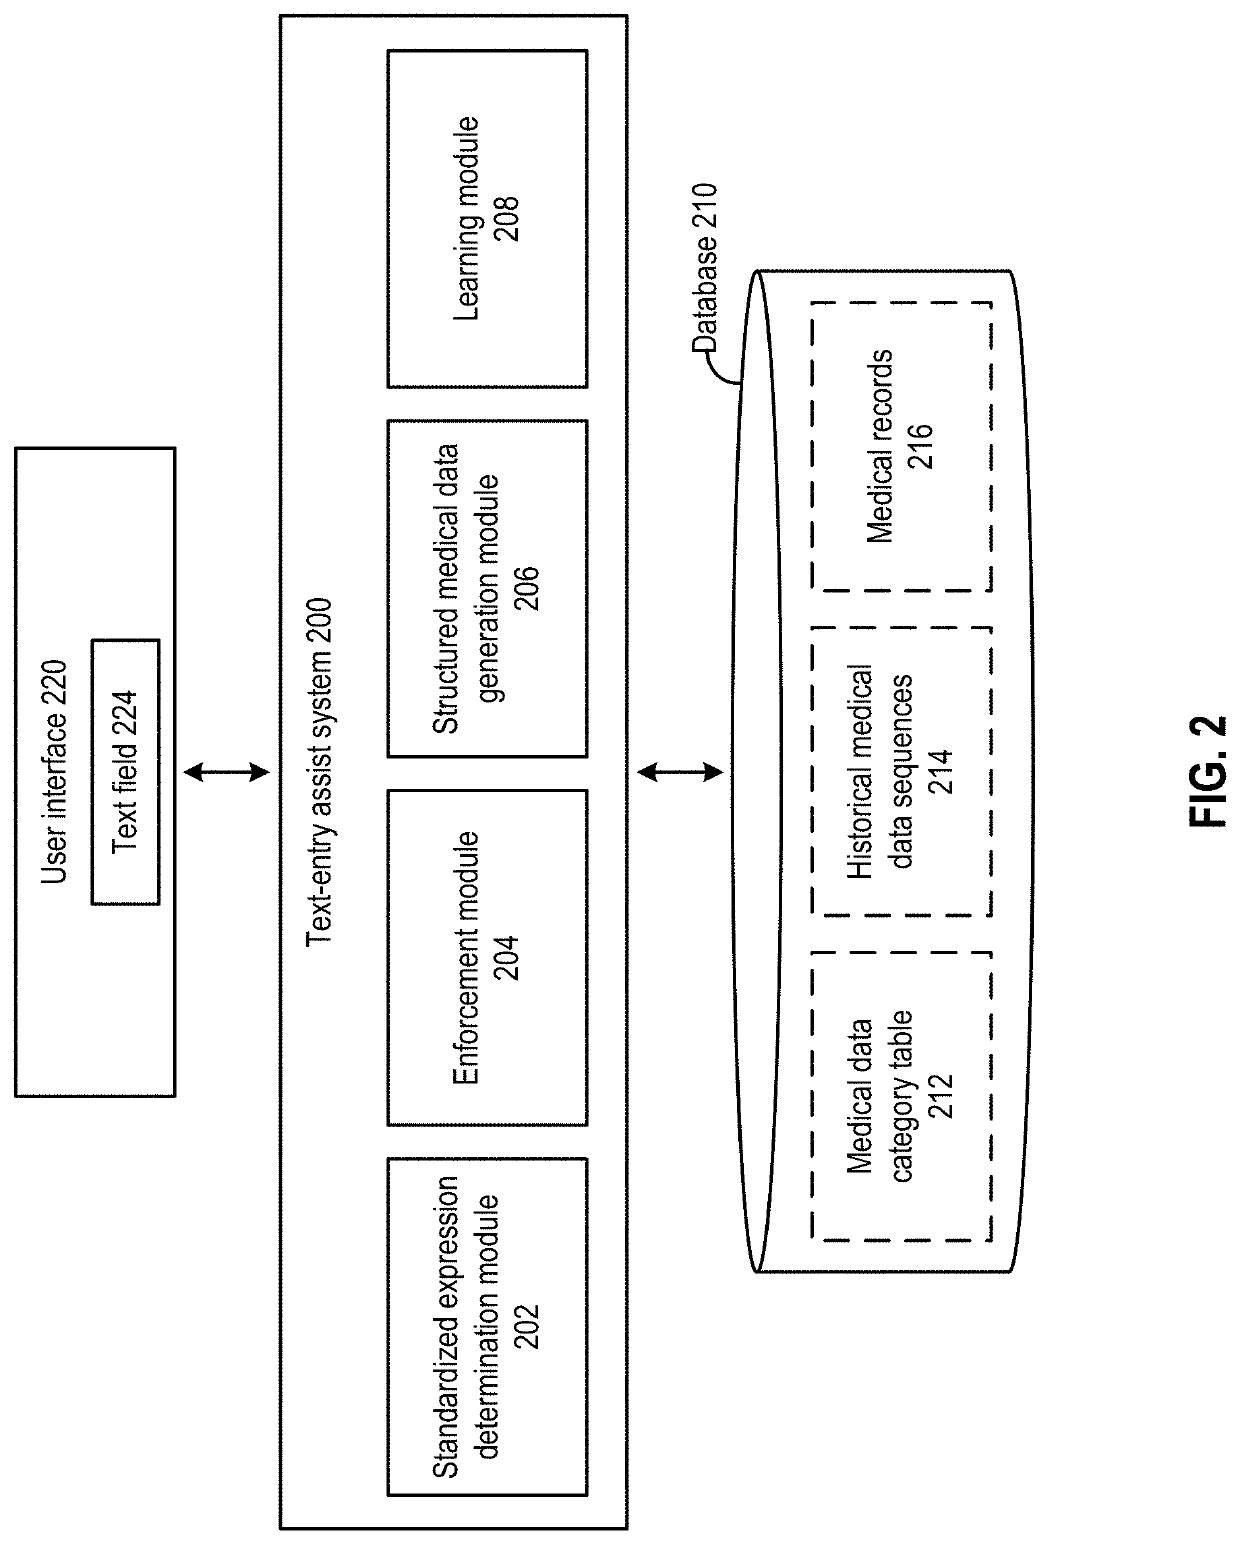 Text entry assistance and conversion to structured medical data